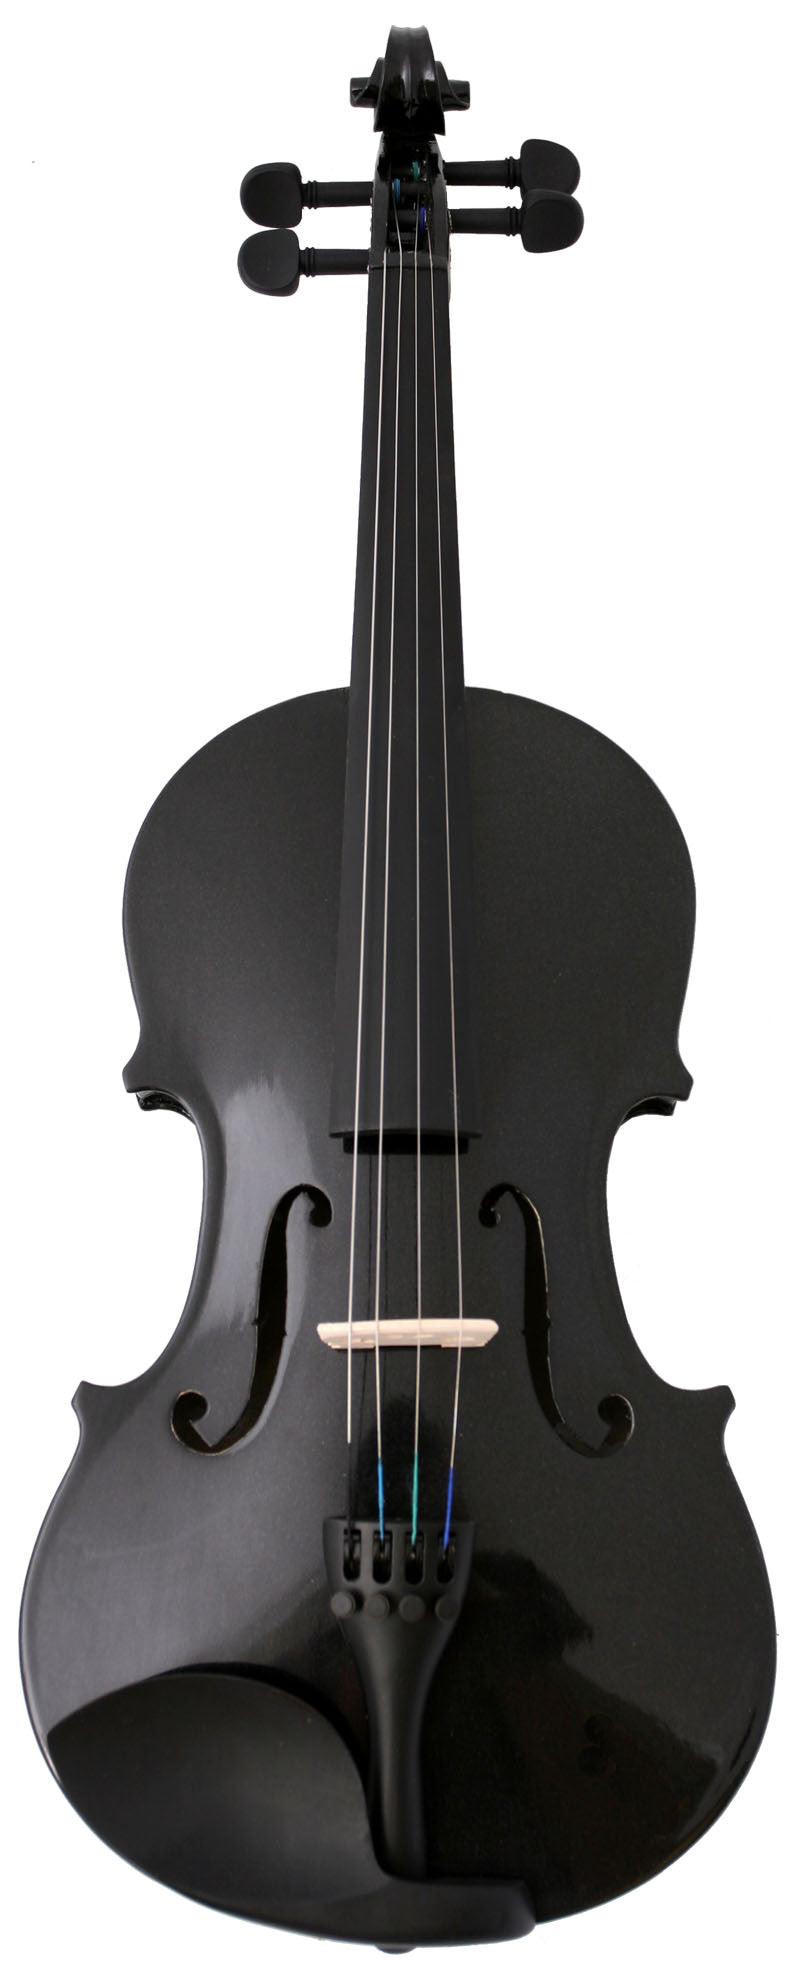 Crescent Direct Vl-bk1/2 1/2 Black Maplewood Acoustic Violin With Case, Rosin, And Bow